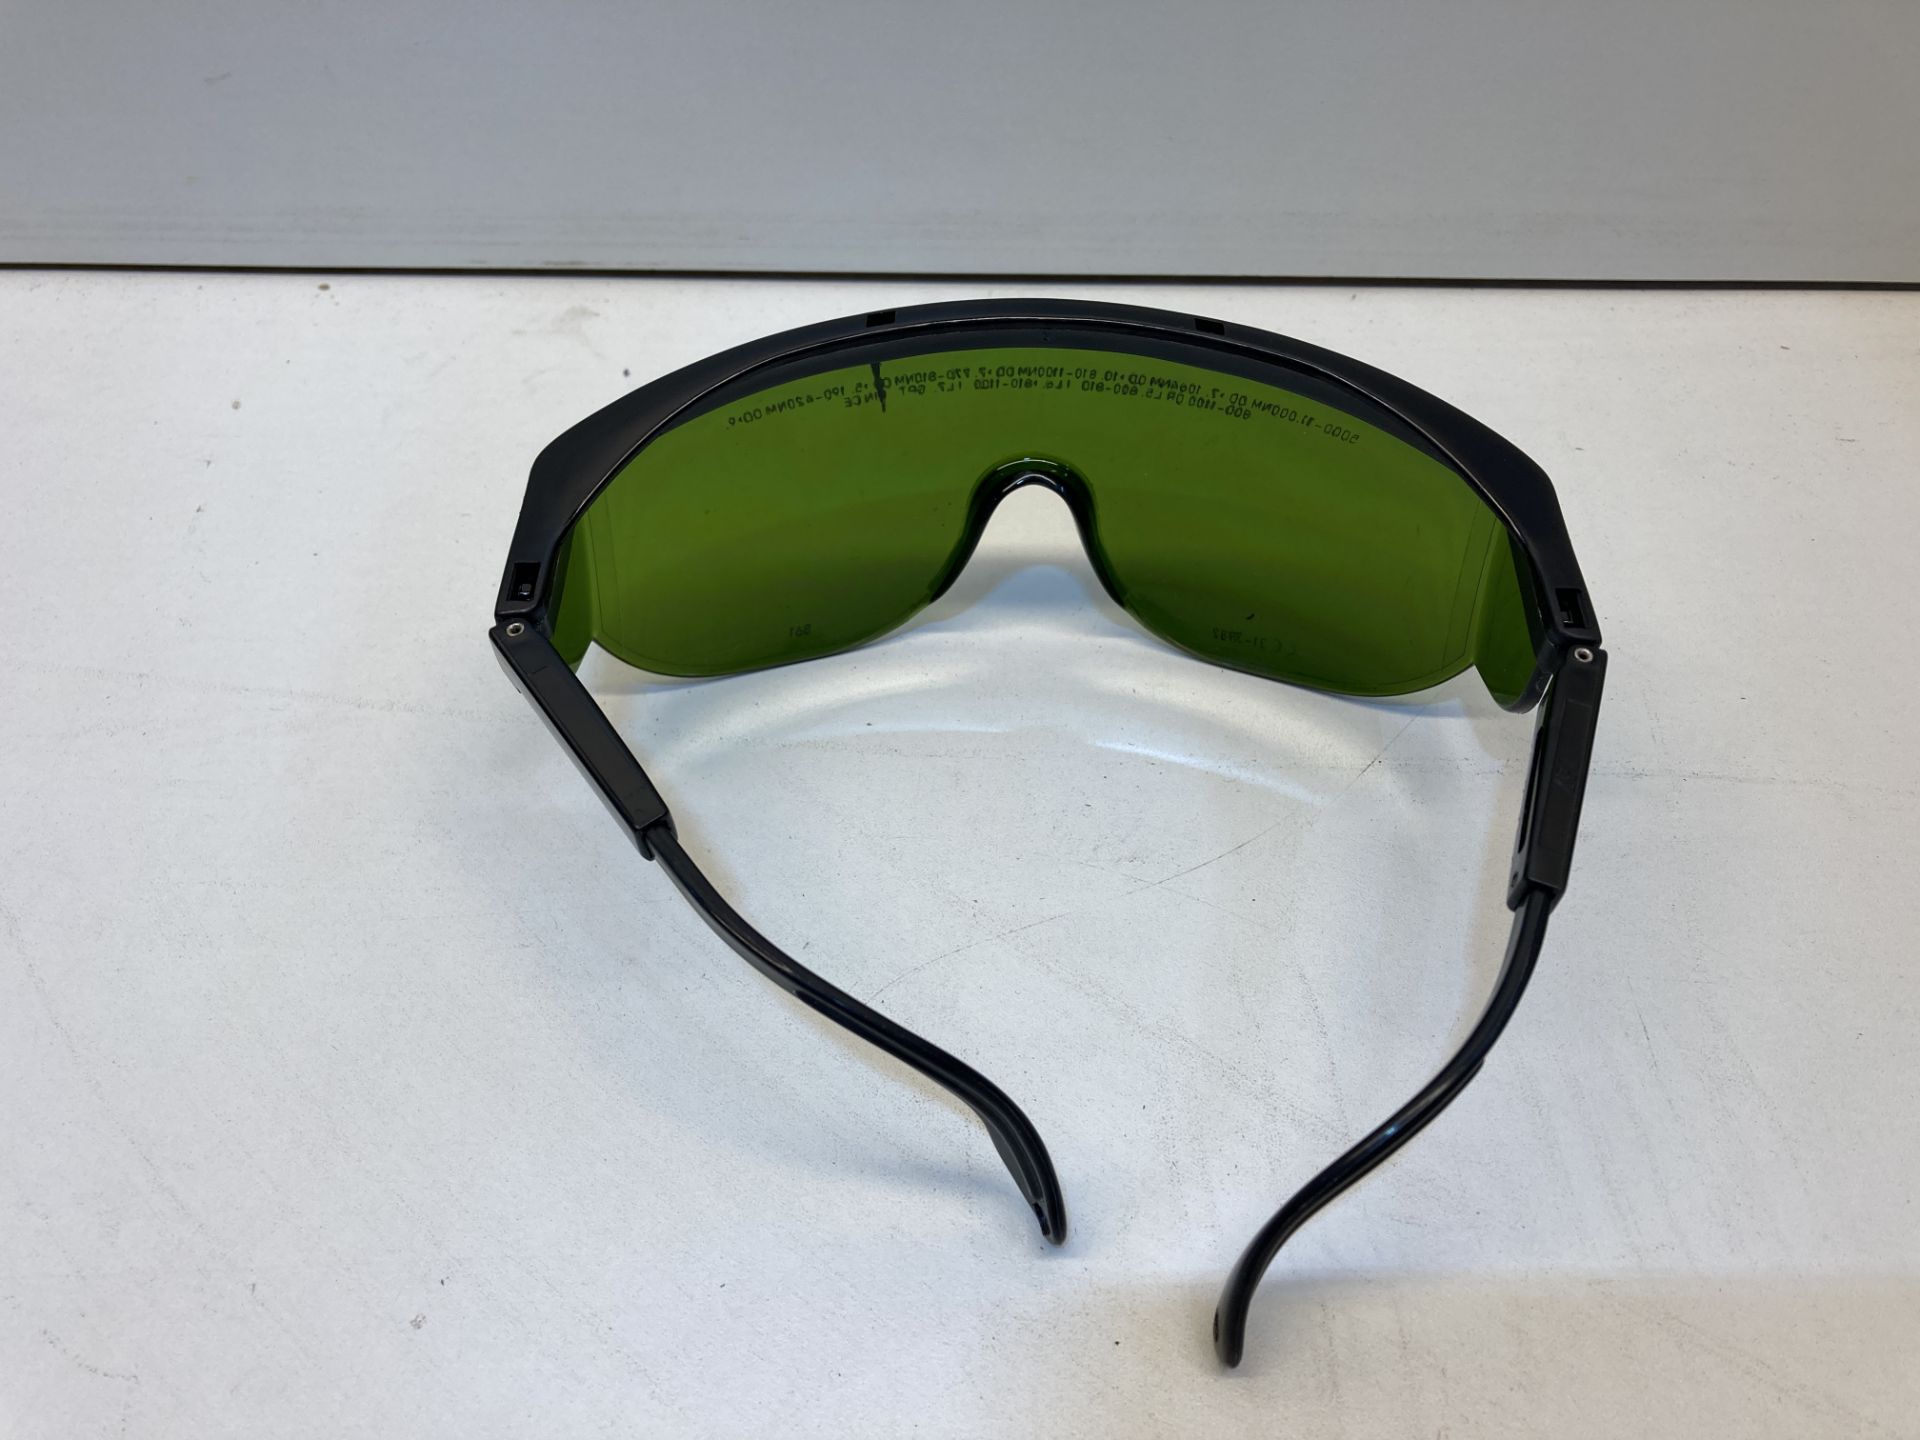 2 Pairs of Protective Glasses in Zip-Up Cases - Image 3 of 6